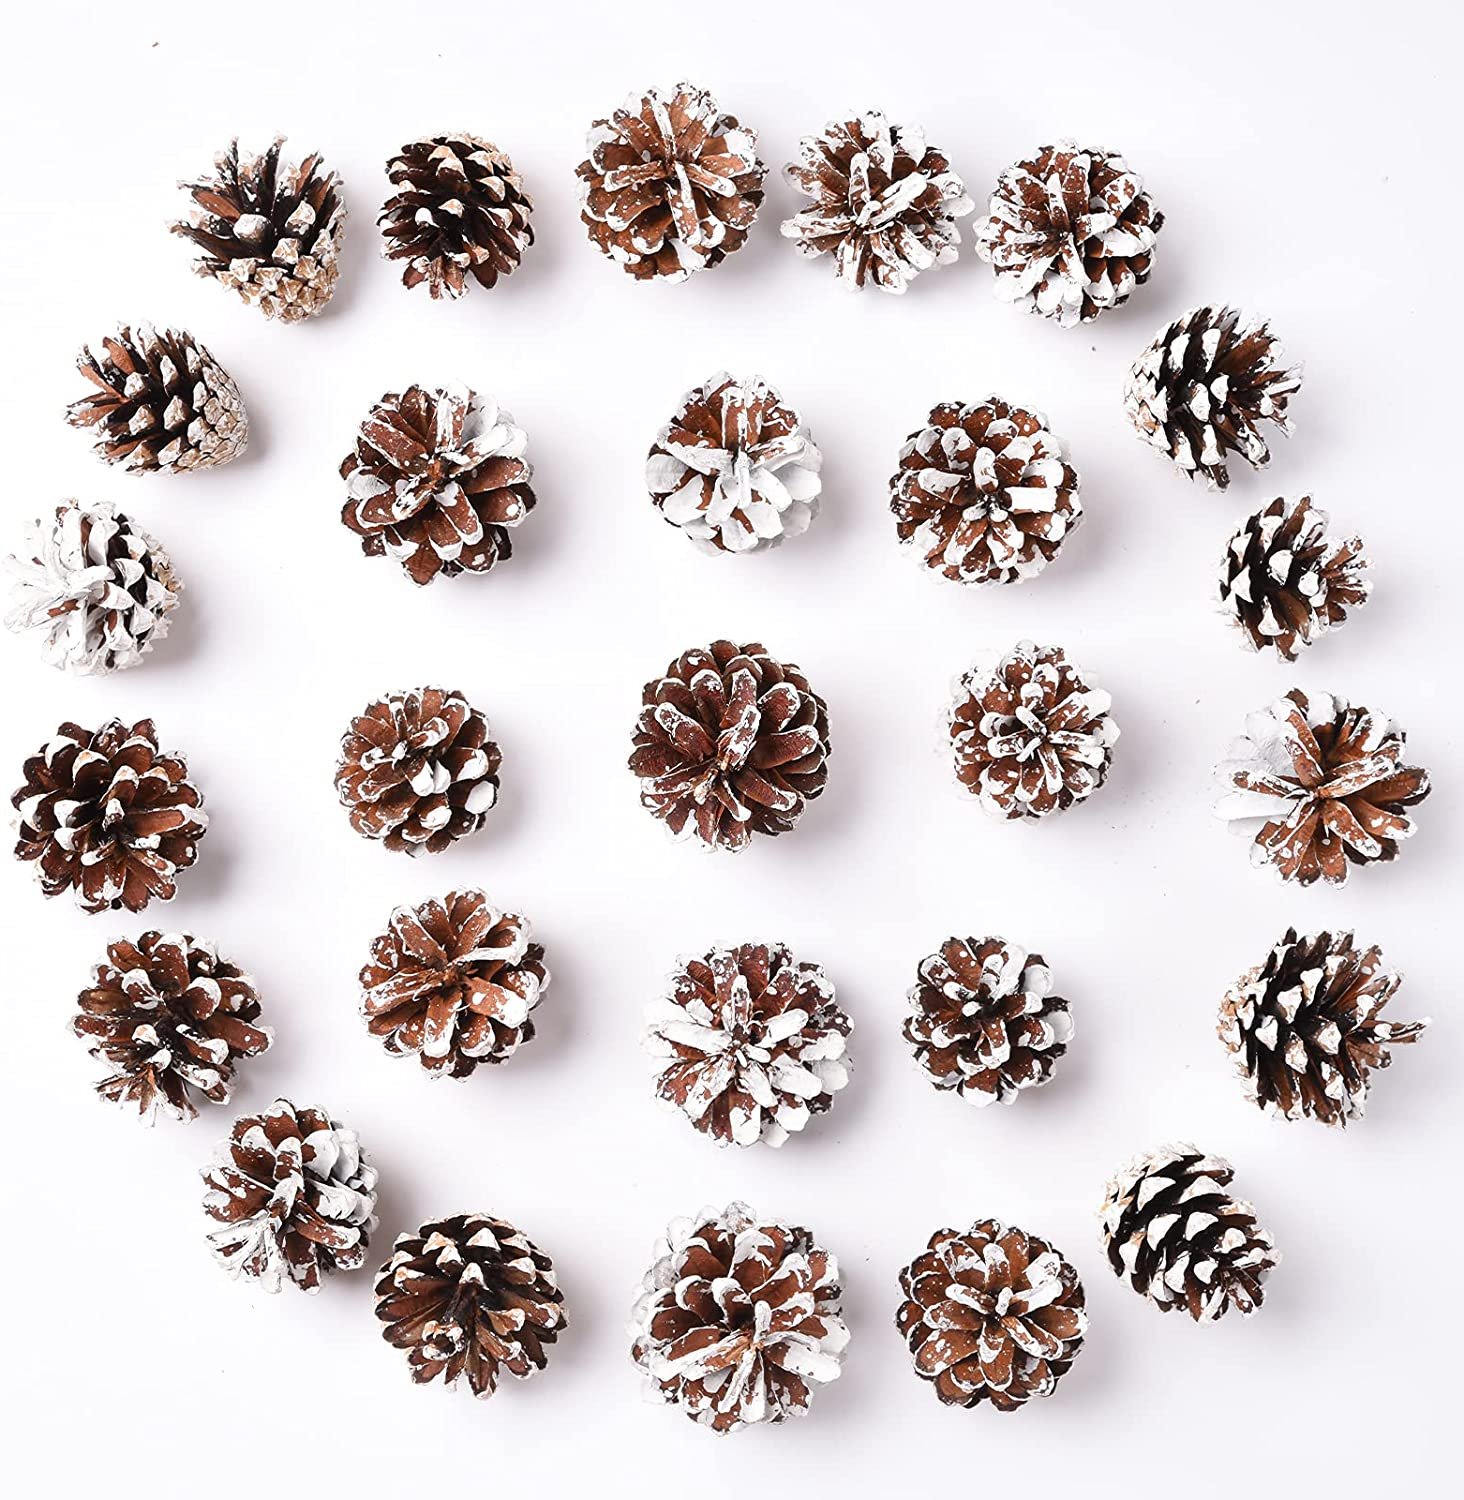 30x White-Tipped Natural Pine Cones, Amazon